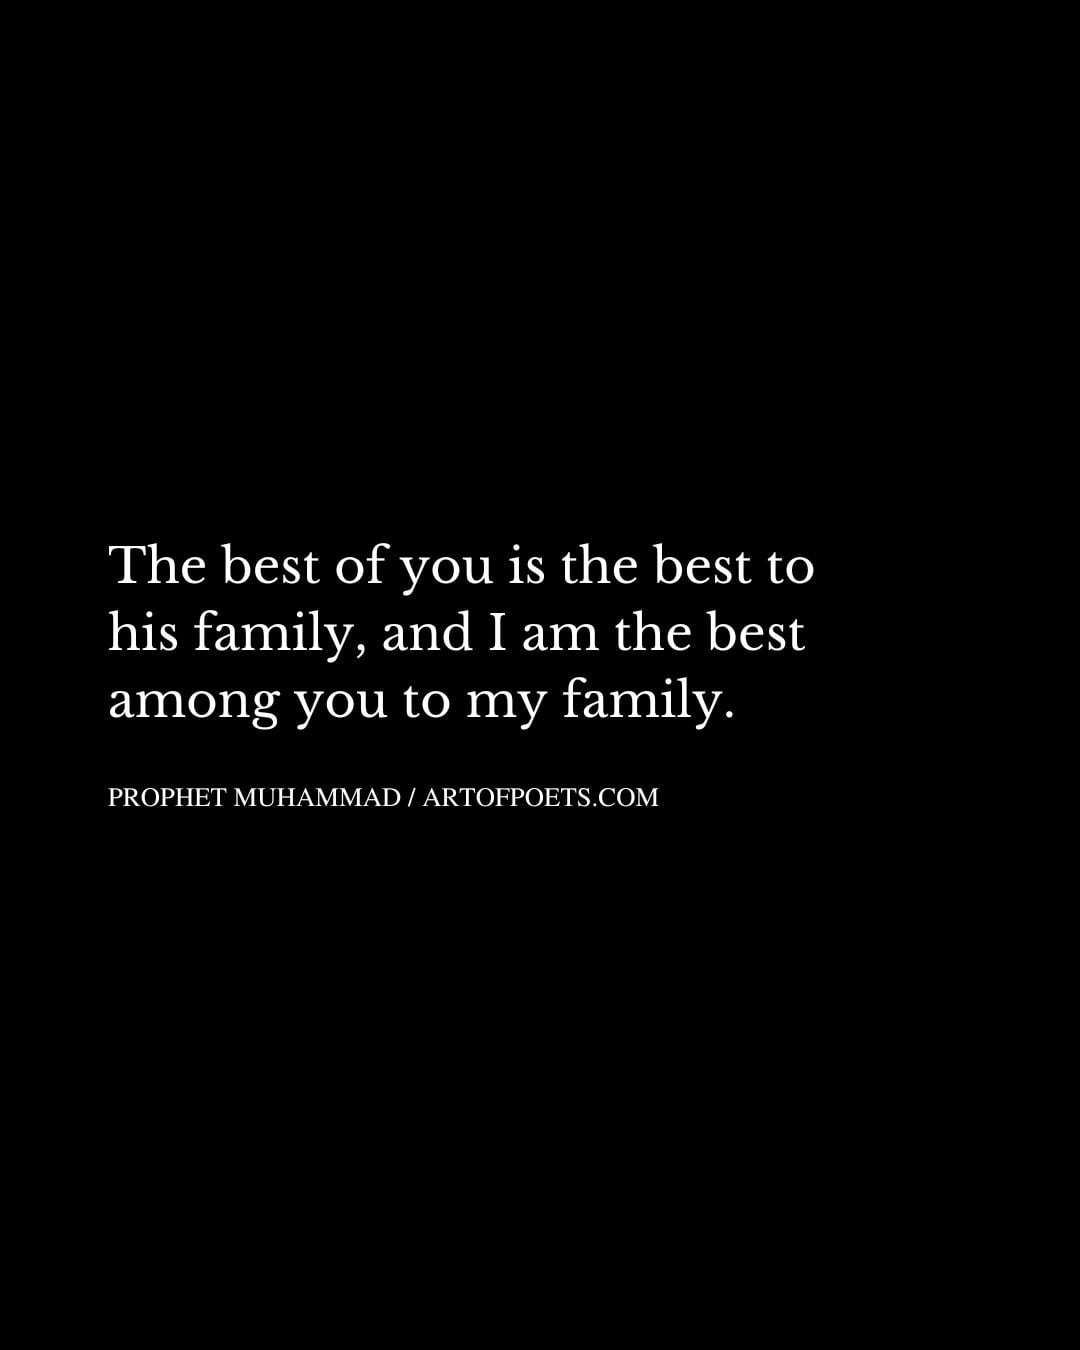 The best of you is the best to his family and I am the best among you to my family